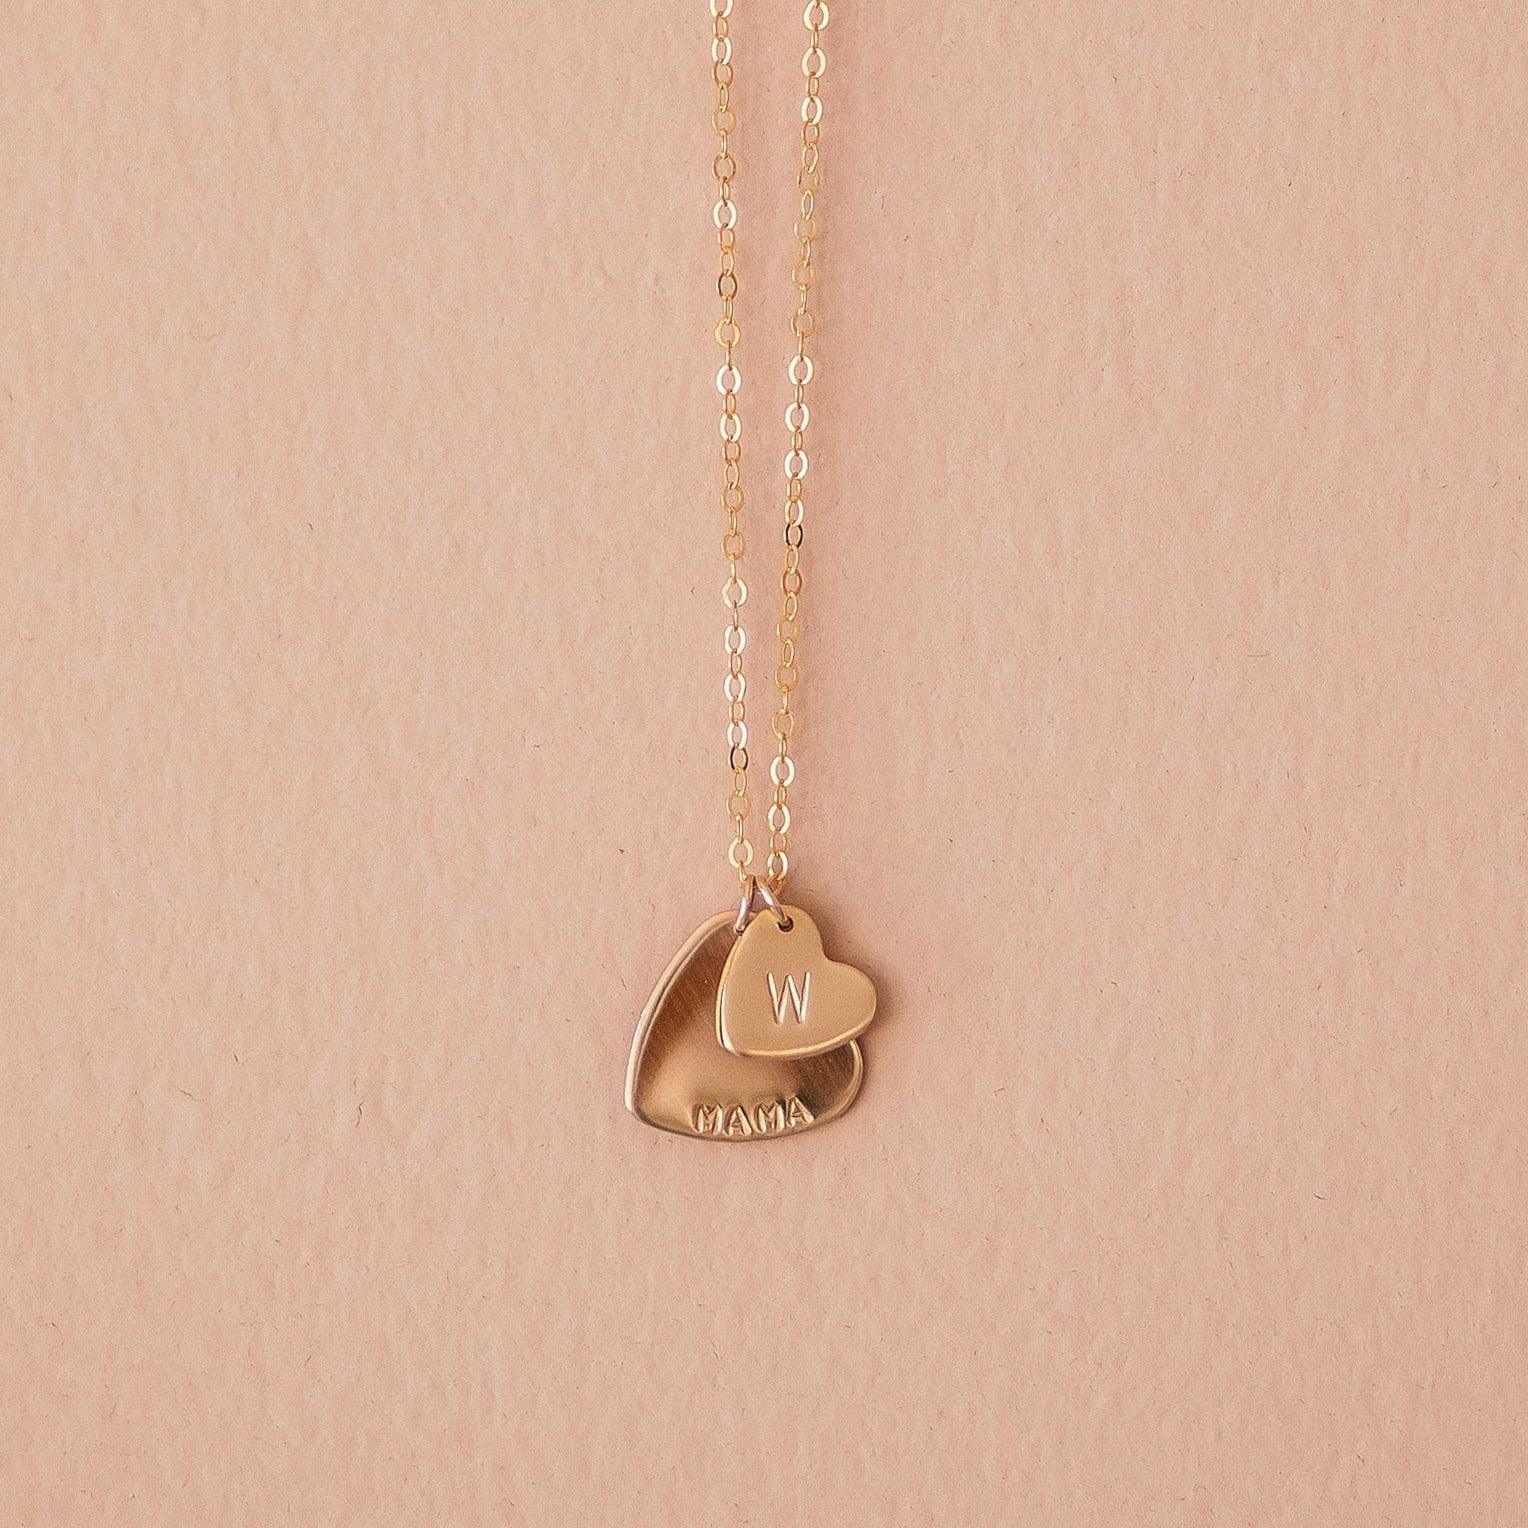 Mama's Heart Necklace - Nolia Jewelry - Meaningful + Sustainably Handcrafted Jewelry